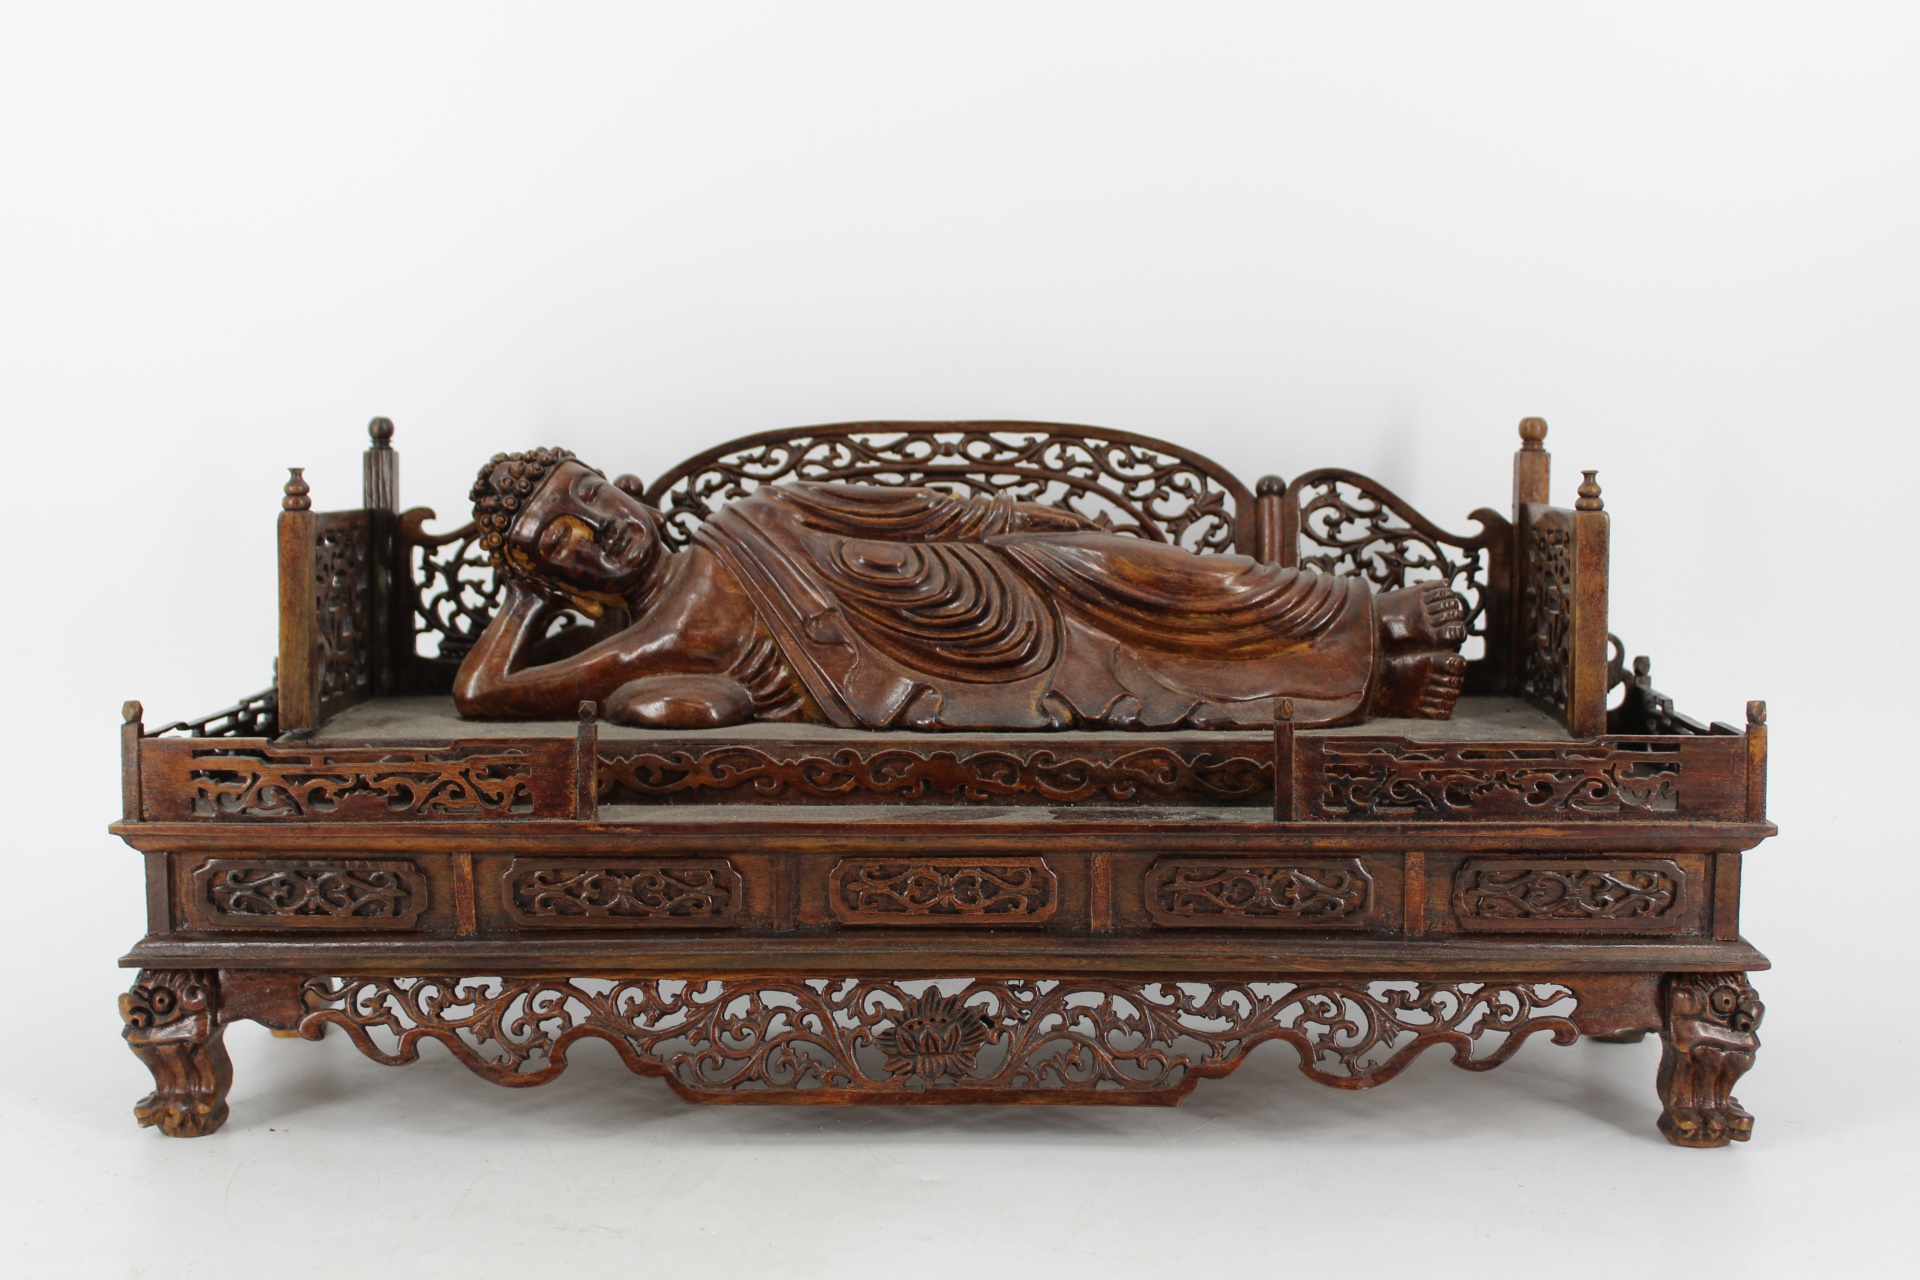 FINELY CARVED CHINESE WOOD SCULPTURE